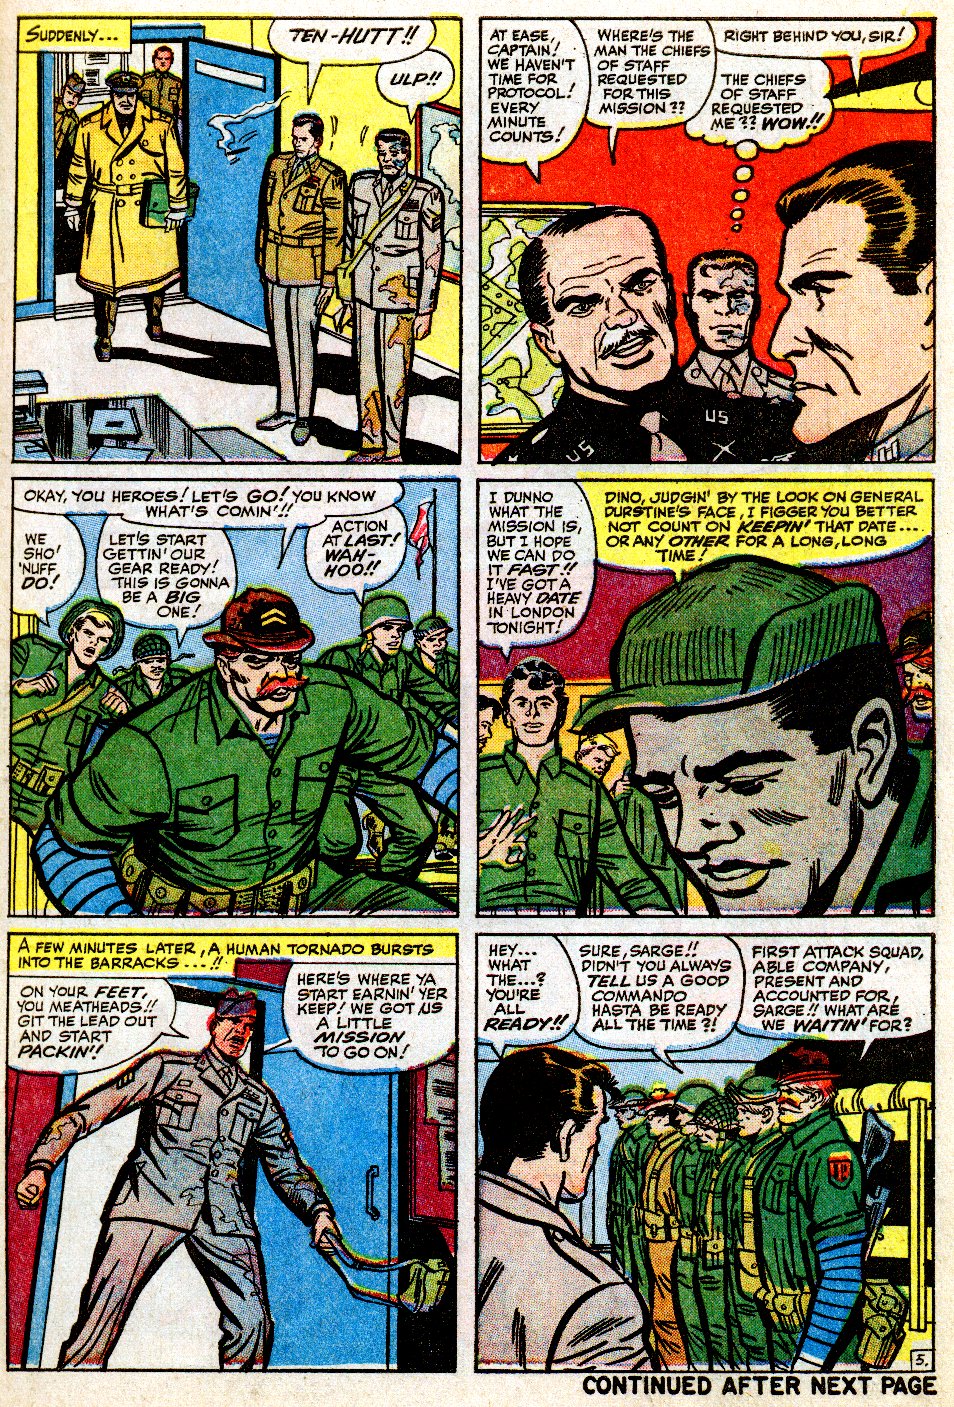 Read online Sgt. Fury comic -  Issue #9 - 7